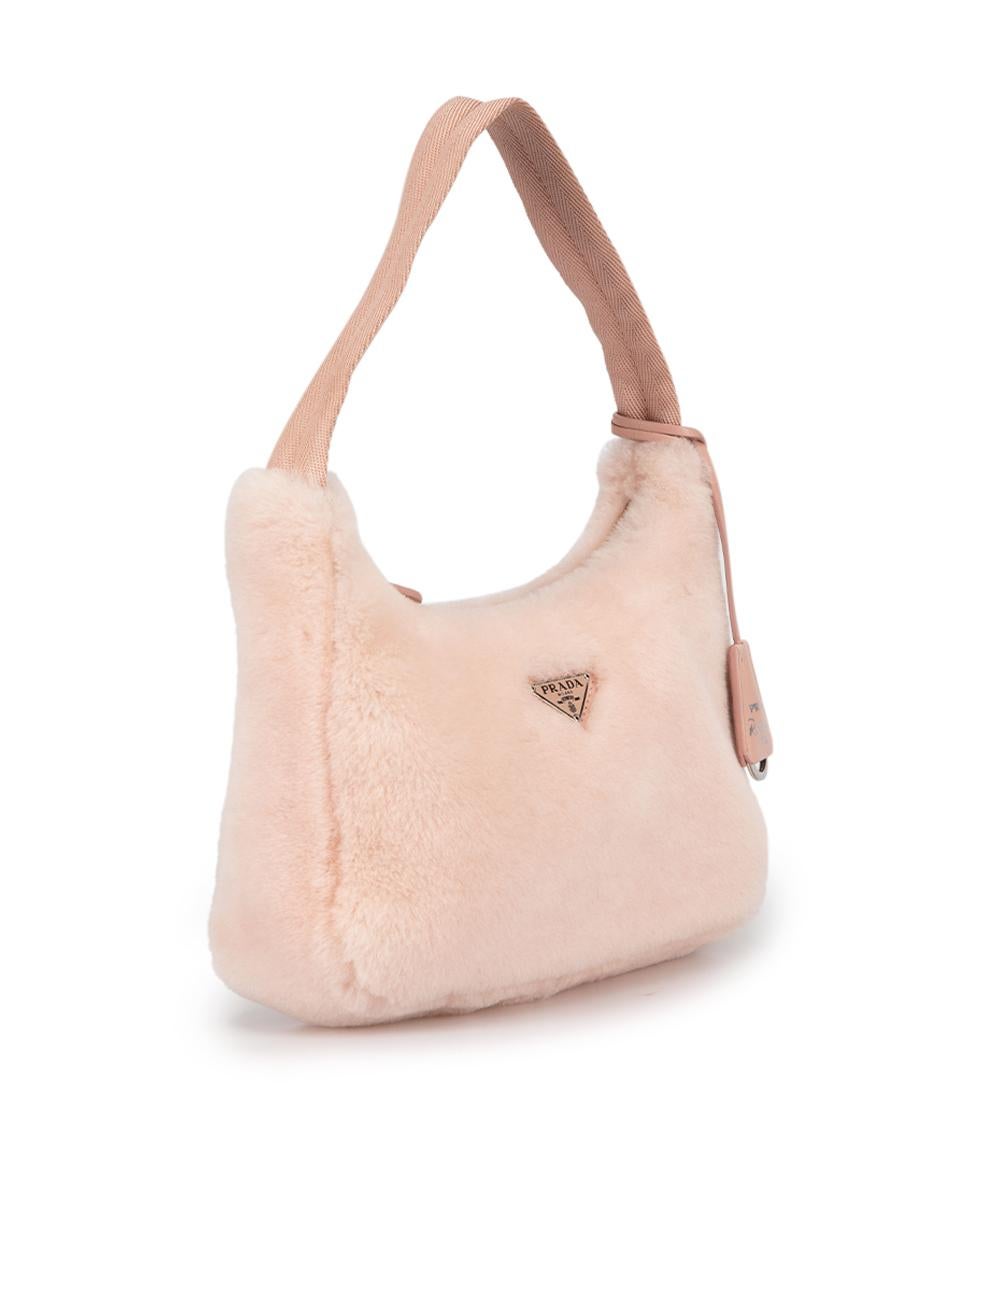 CONDITION is Very good. Minimal wear to bag is evident. Minimal wear to the top handle with slight discolouration at the edge on this used Prada designer resale item. This bag comes with dust bag.



Details


Pink

Sheep shearling

Mini shoulder